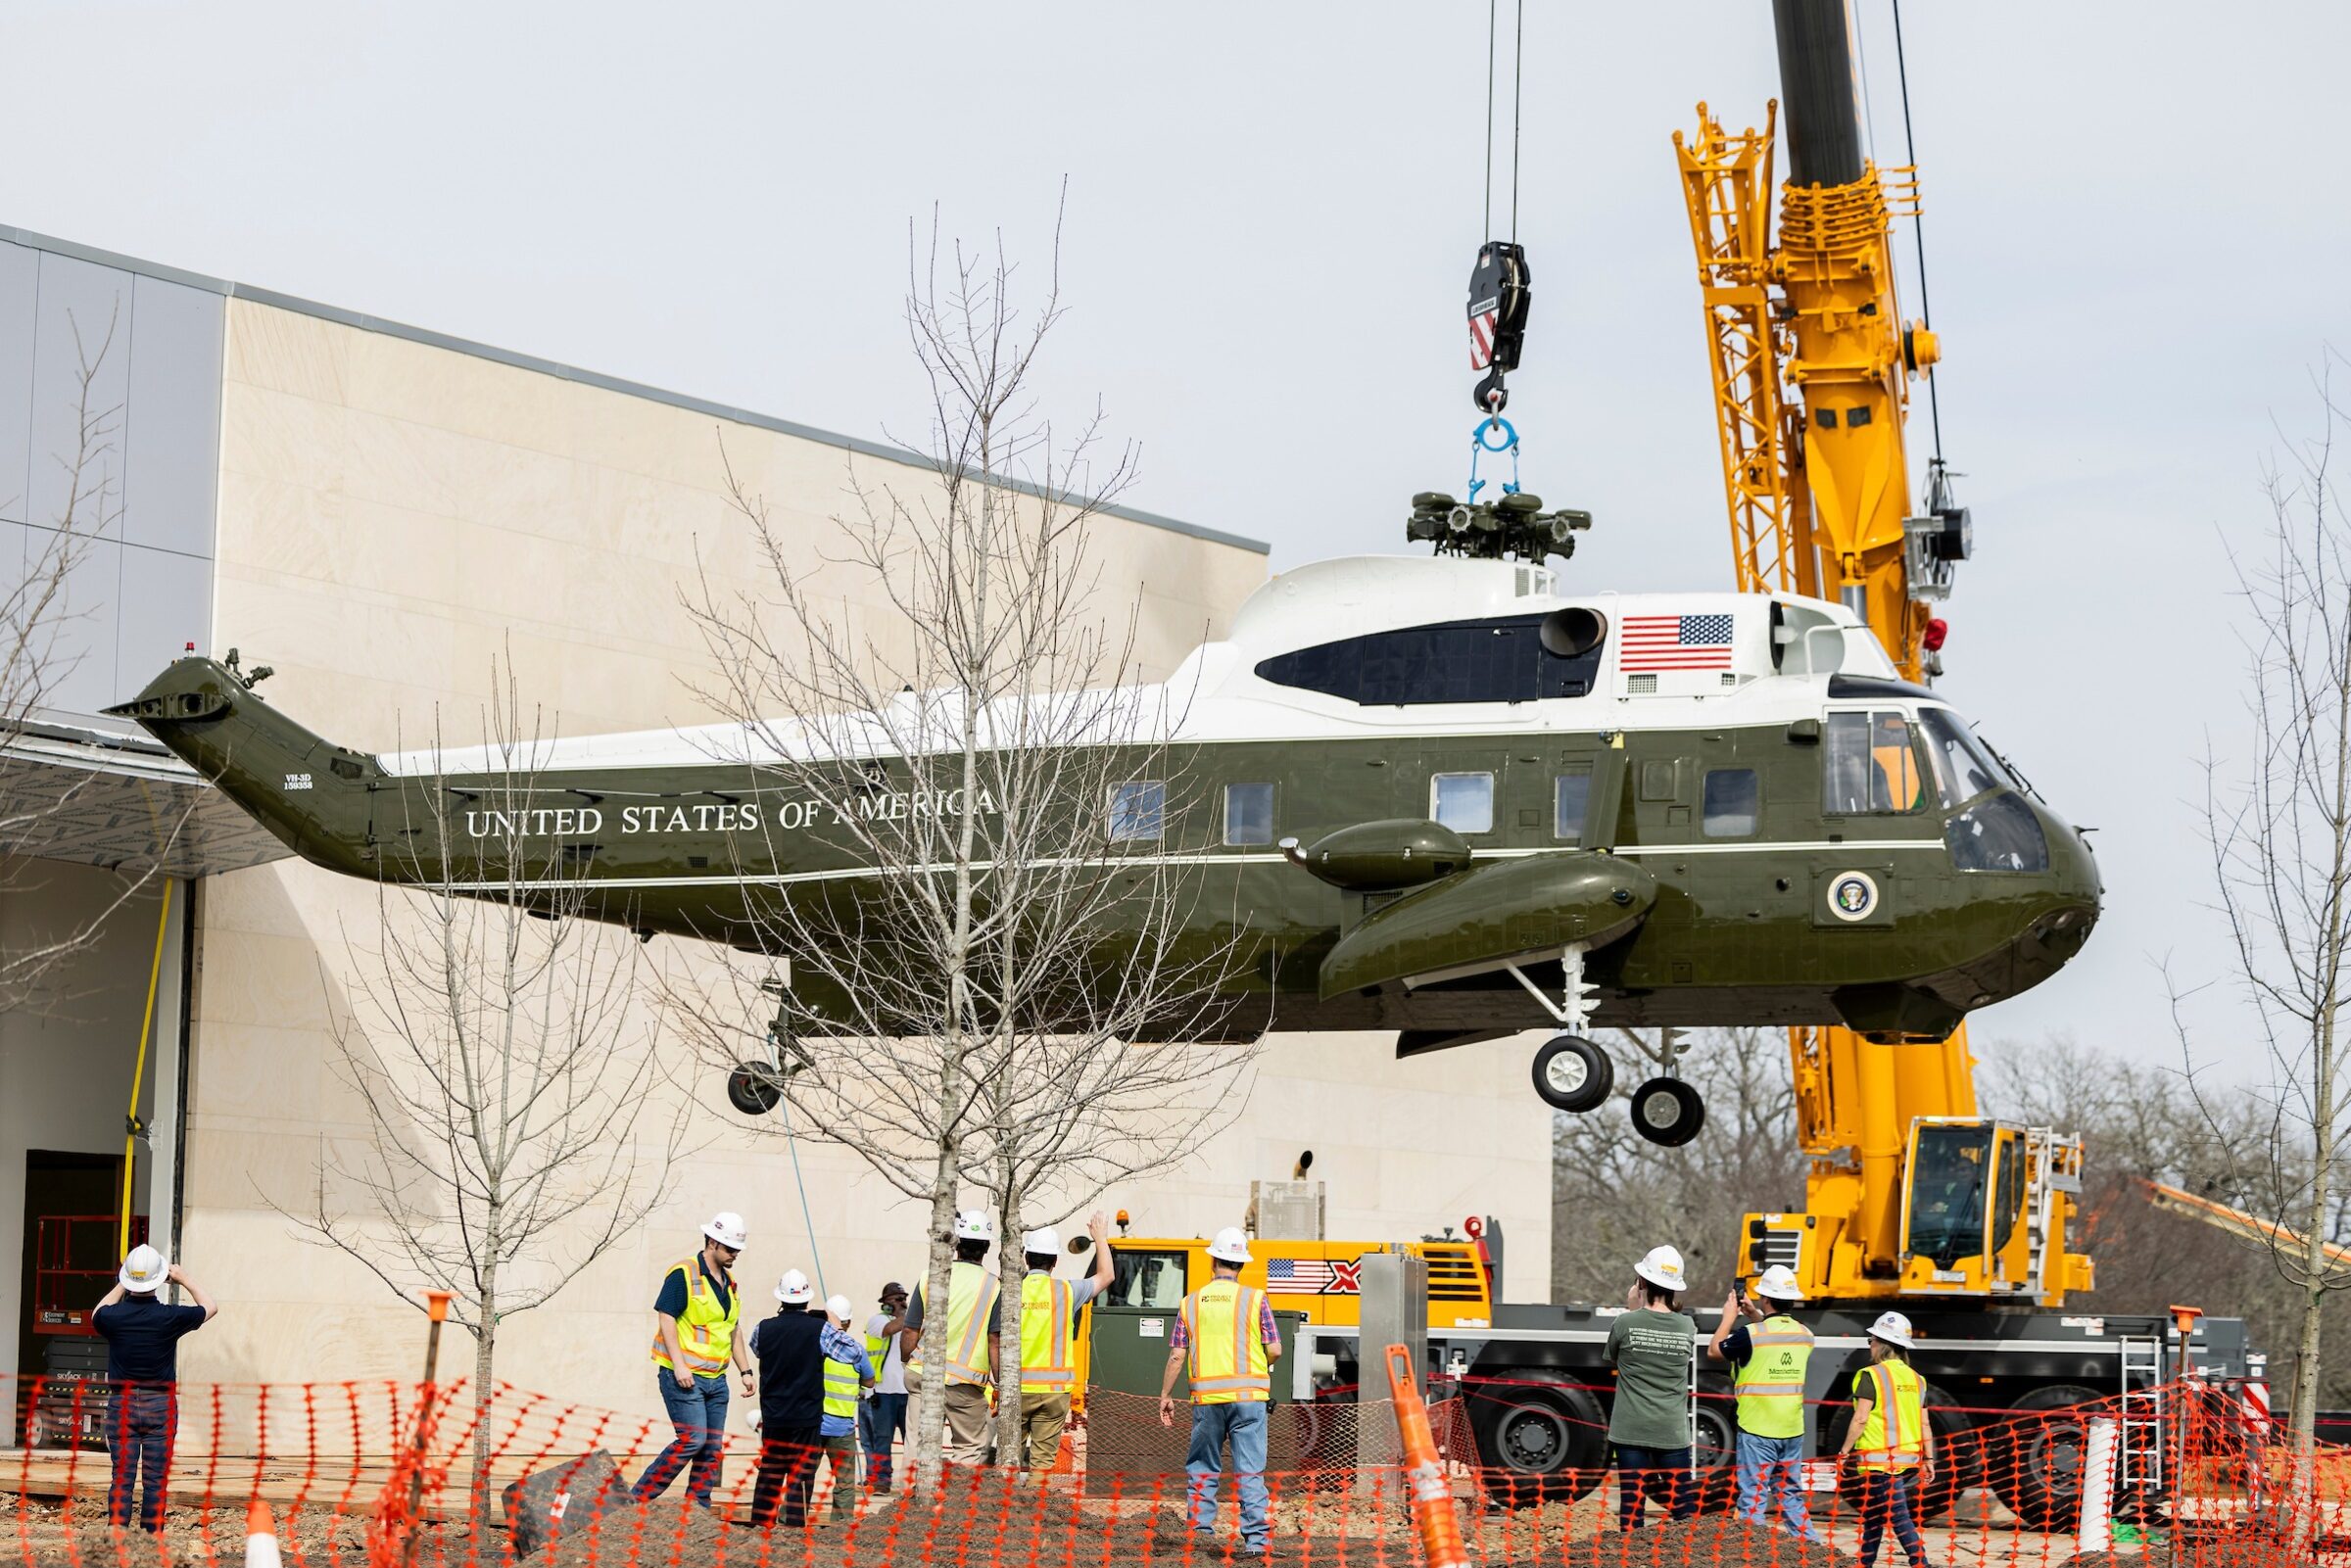 Marine One helicopter lifted by crane into the Pavilion building as construction workers look on